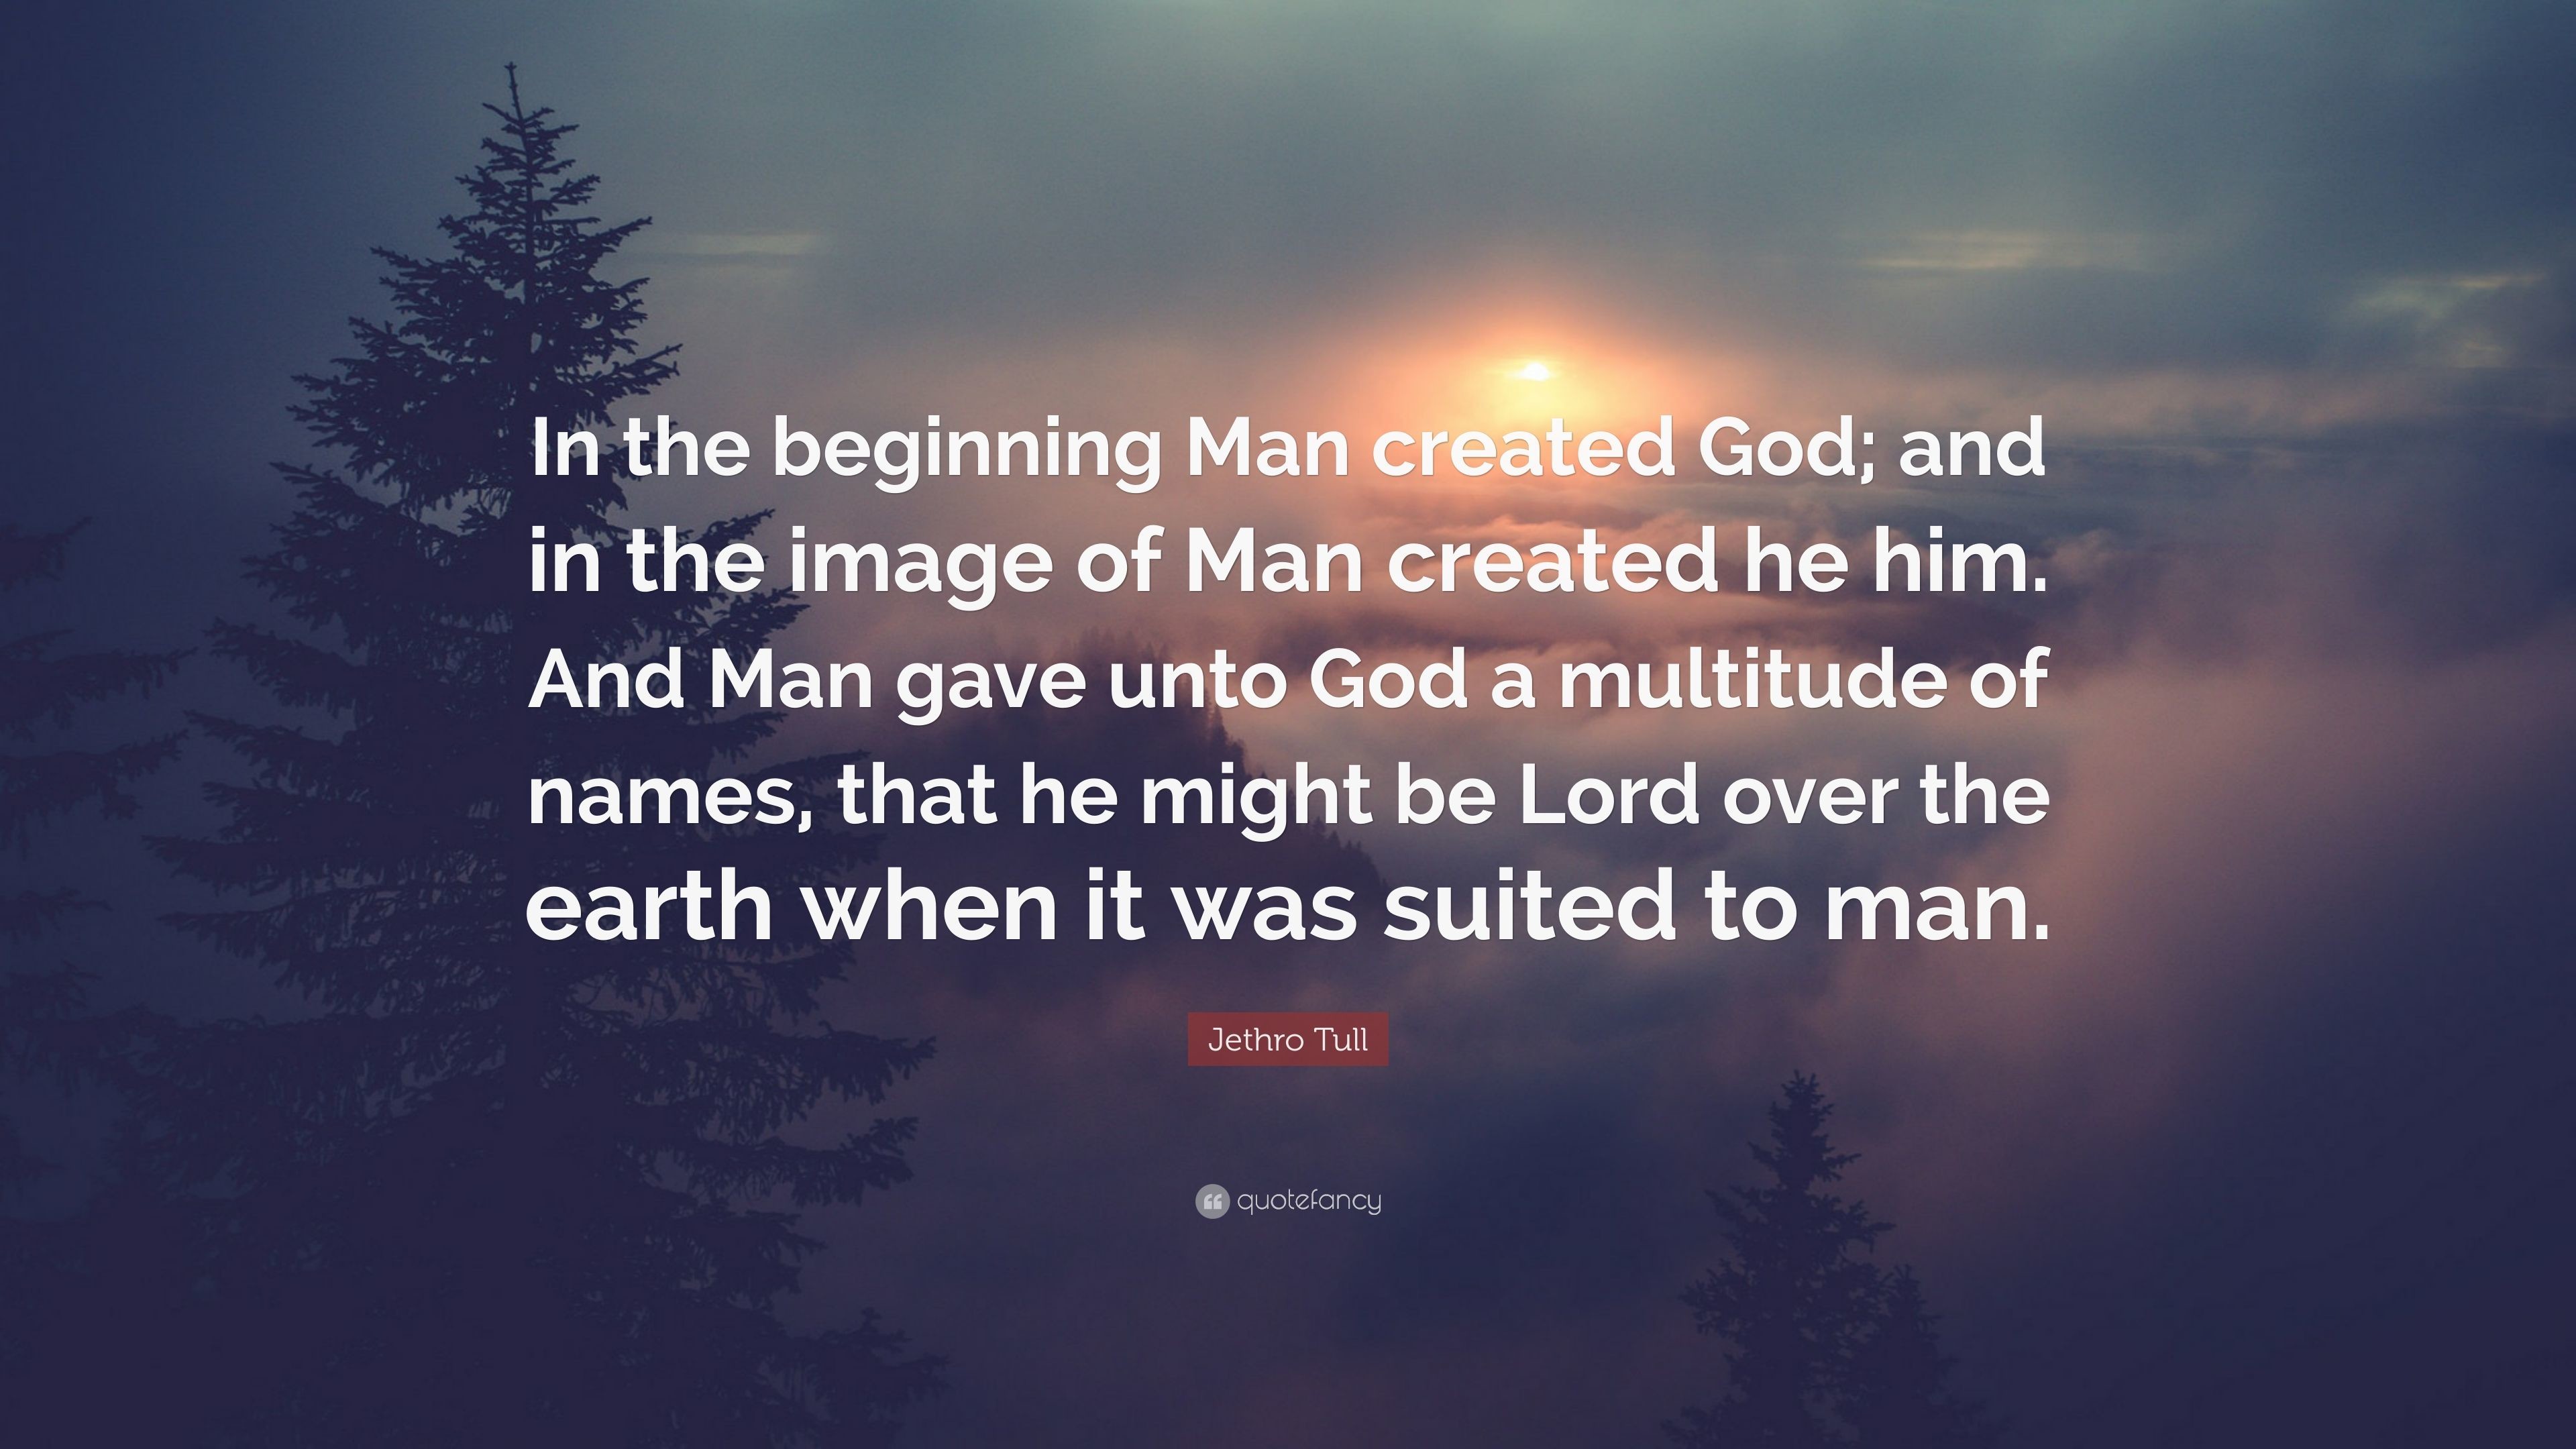 3840x2160 Jethro Tull Quote: “In the beginning Man created God; and in the image